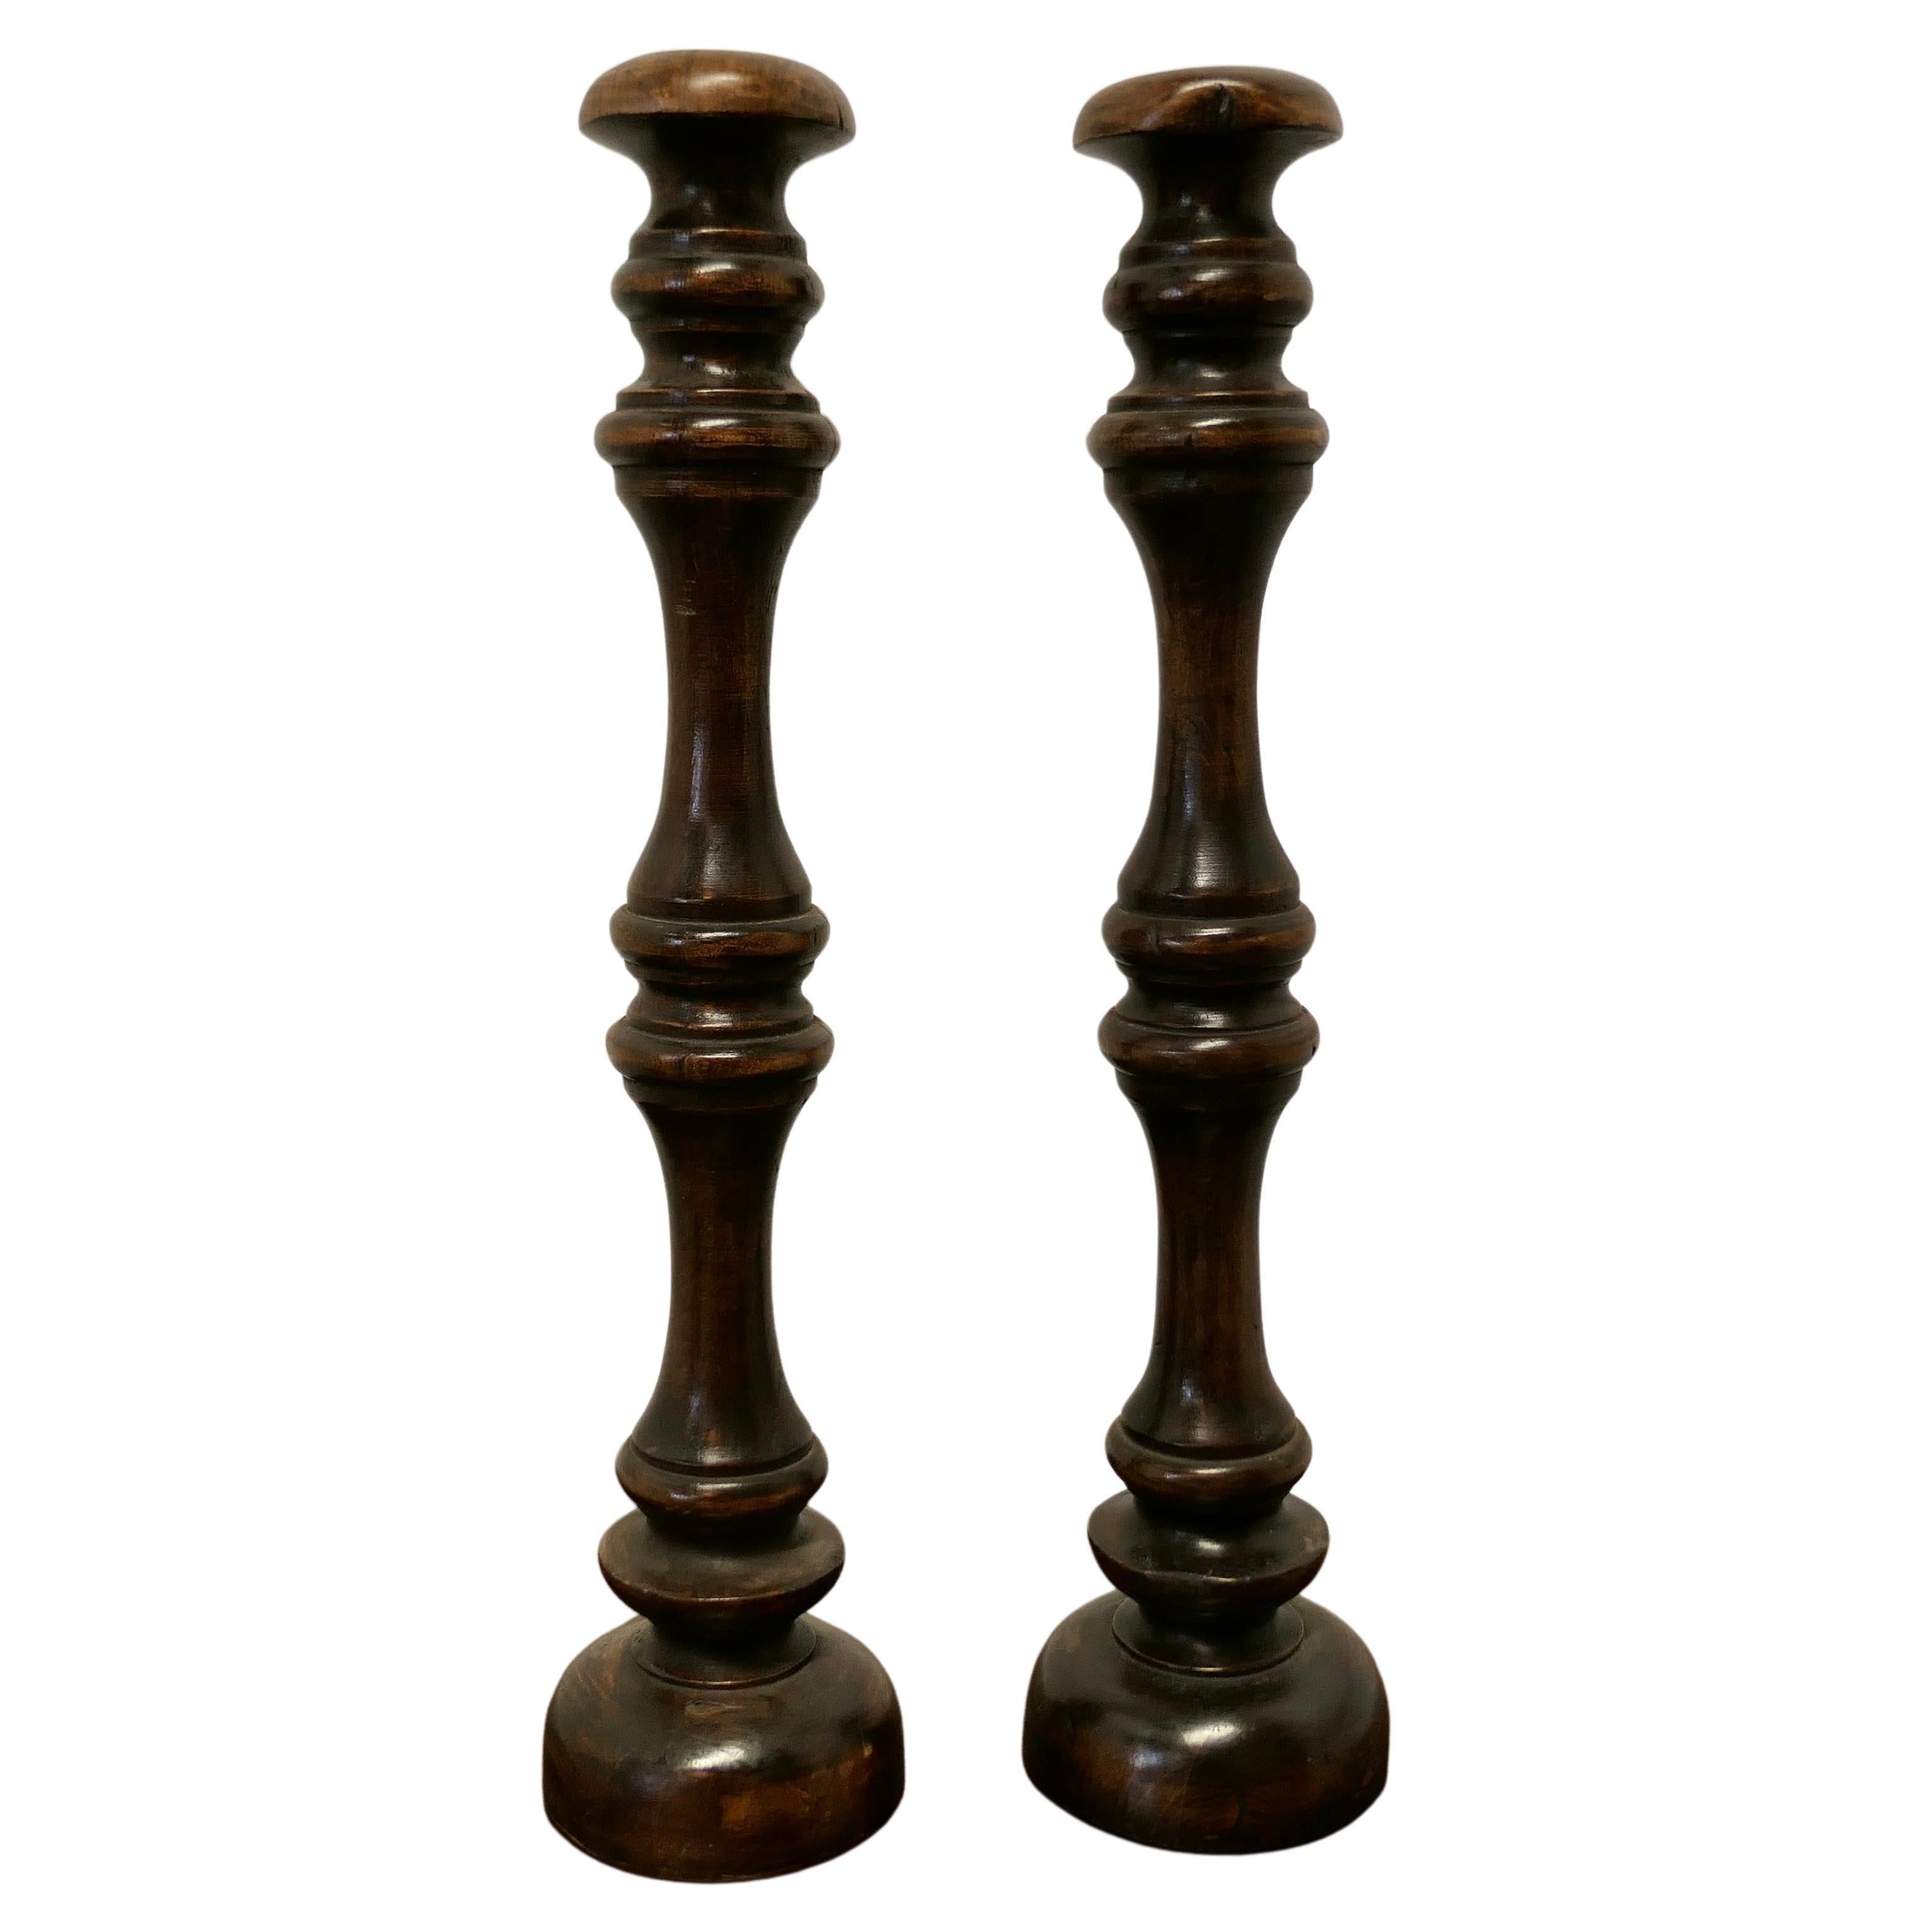 Pair of Tall French Turned Wooden Wig Stands, Shop Display Hats